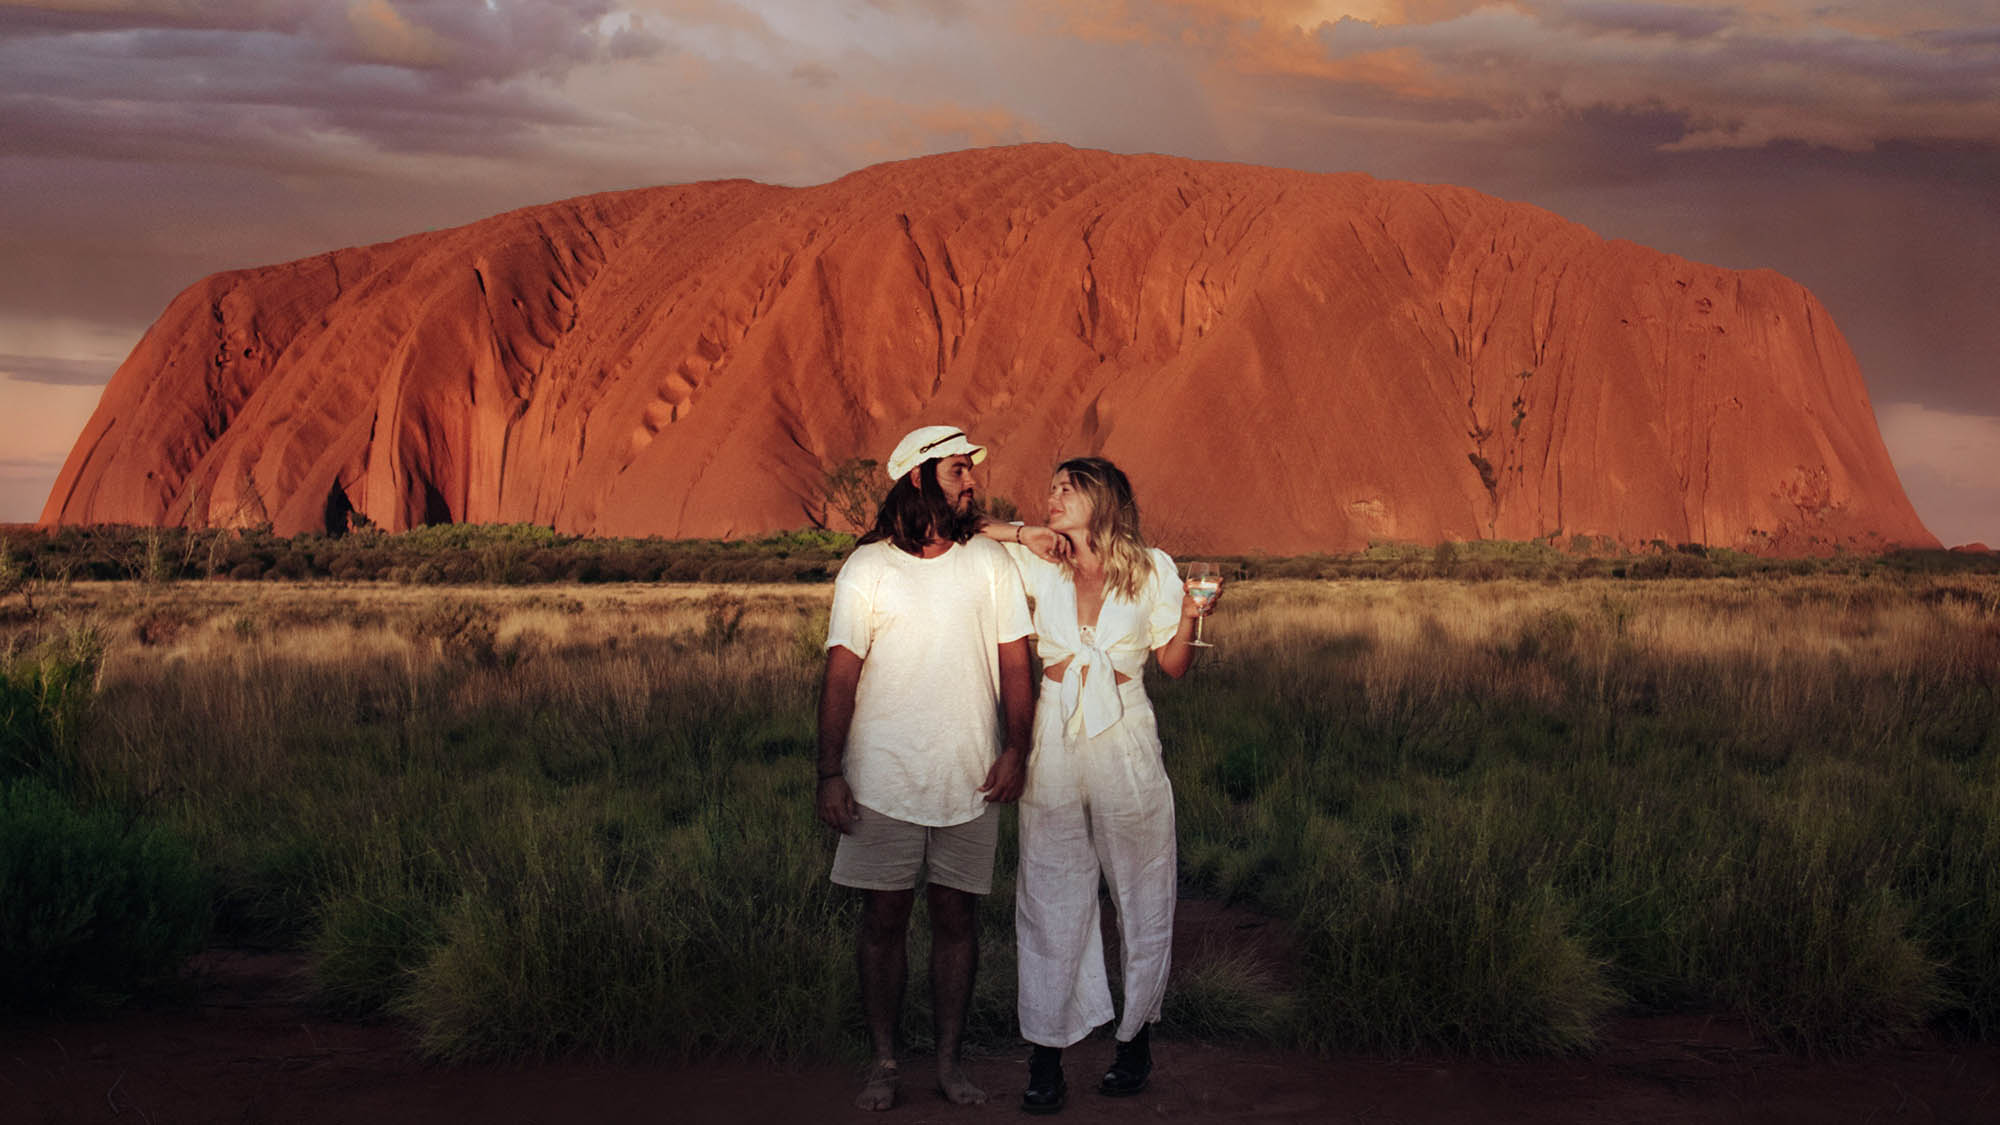 Red Centre Self Drive Alice Springs, Uluru & Kings Canyon - NT Now